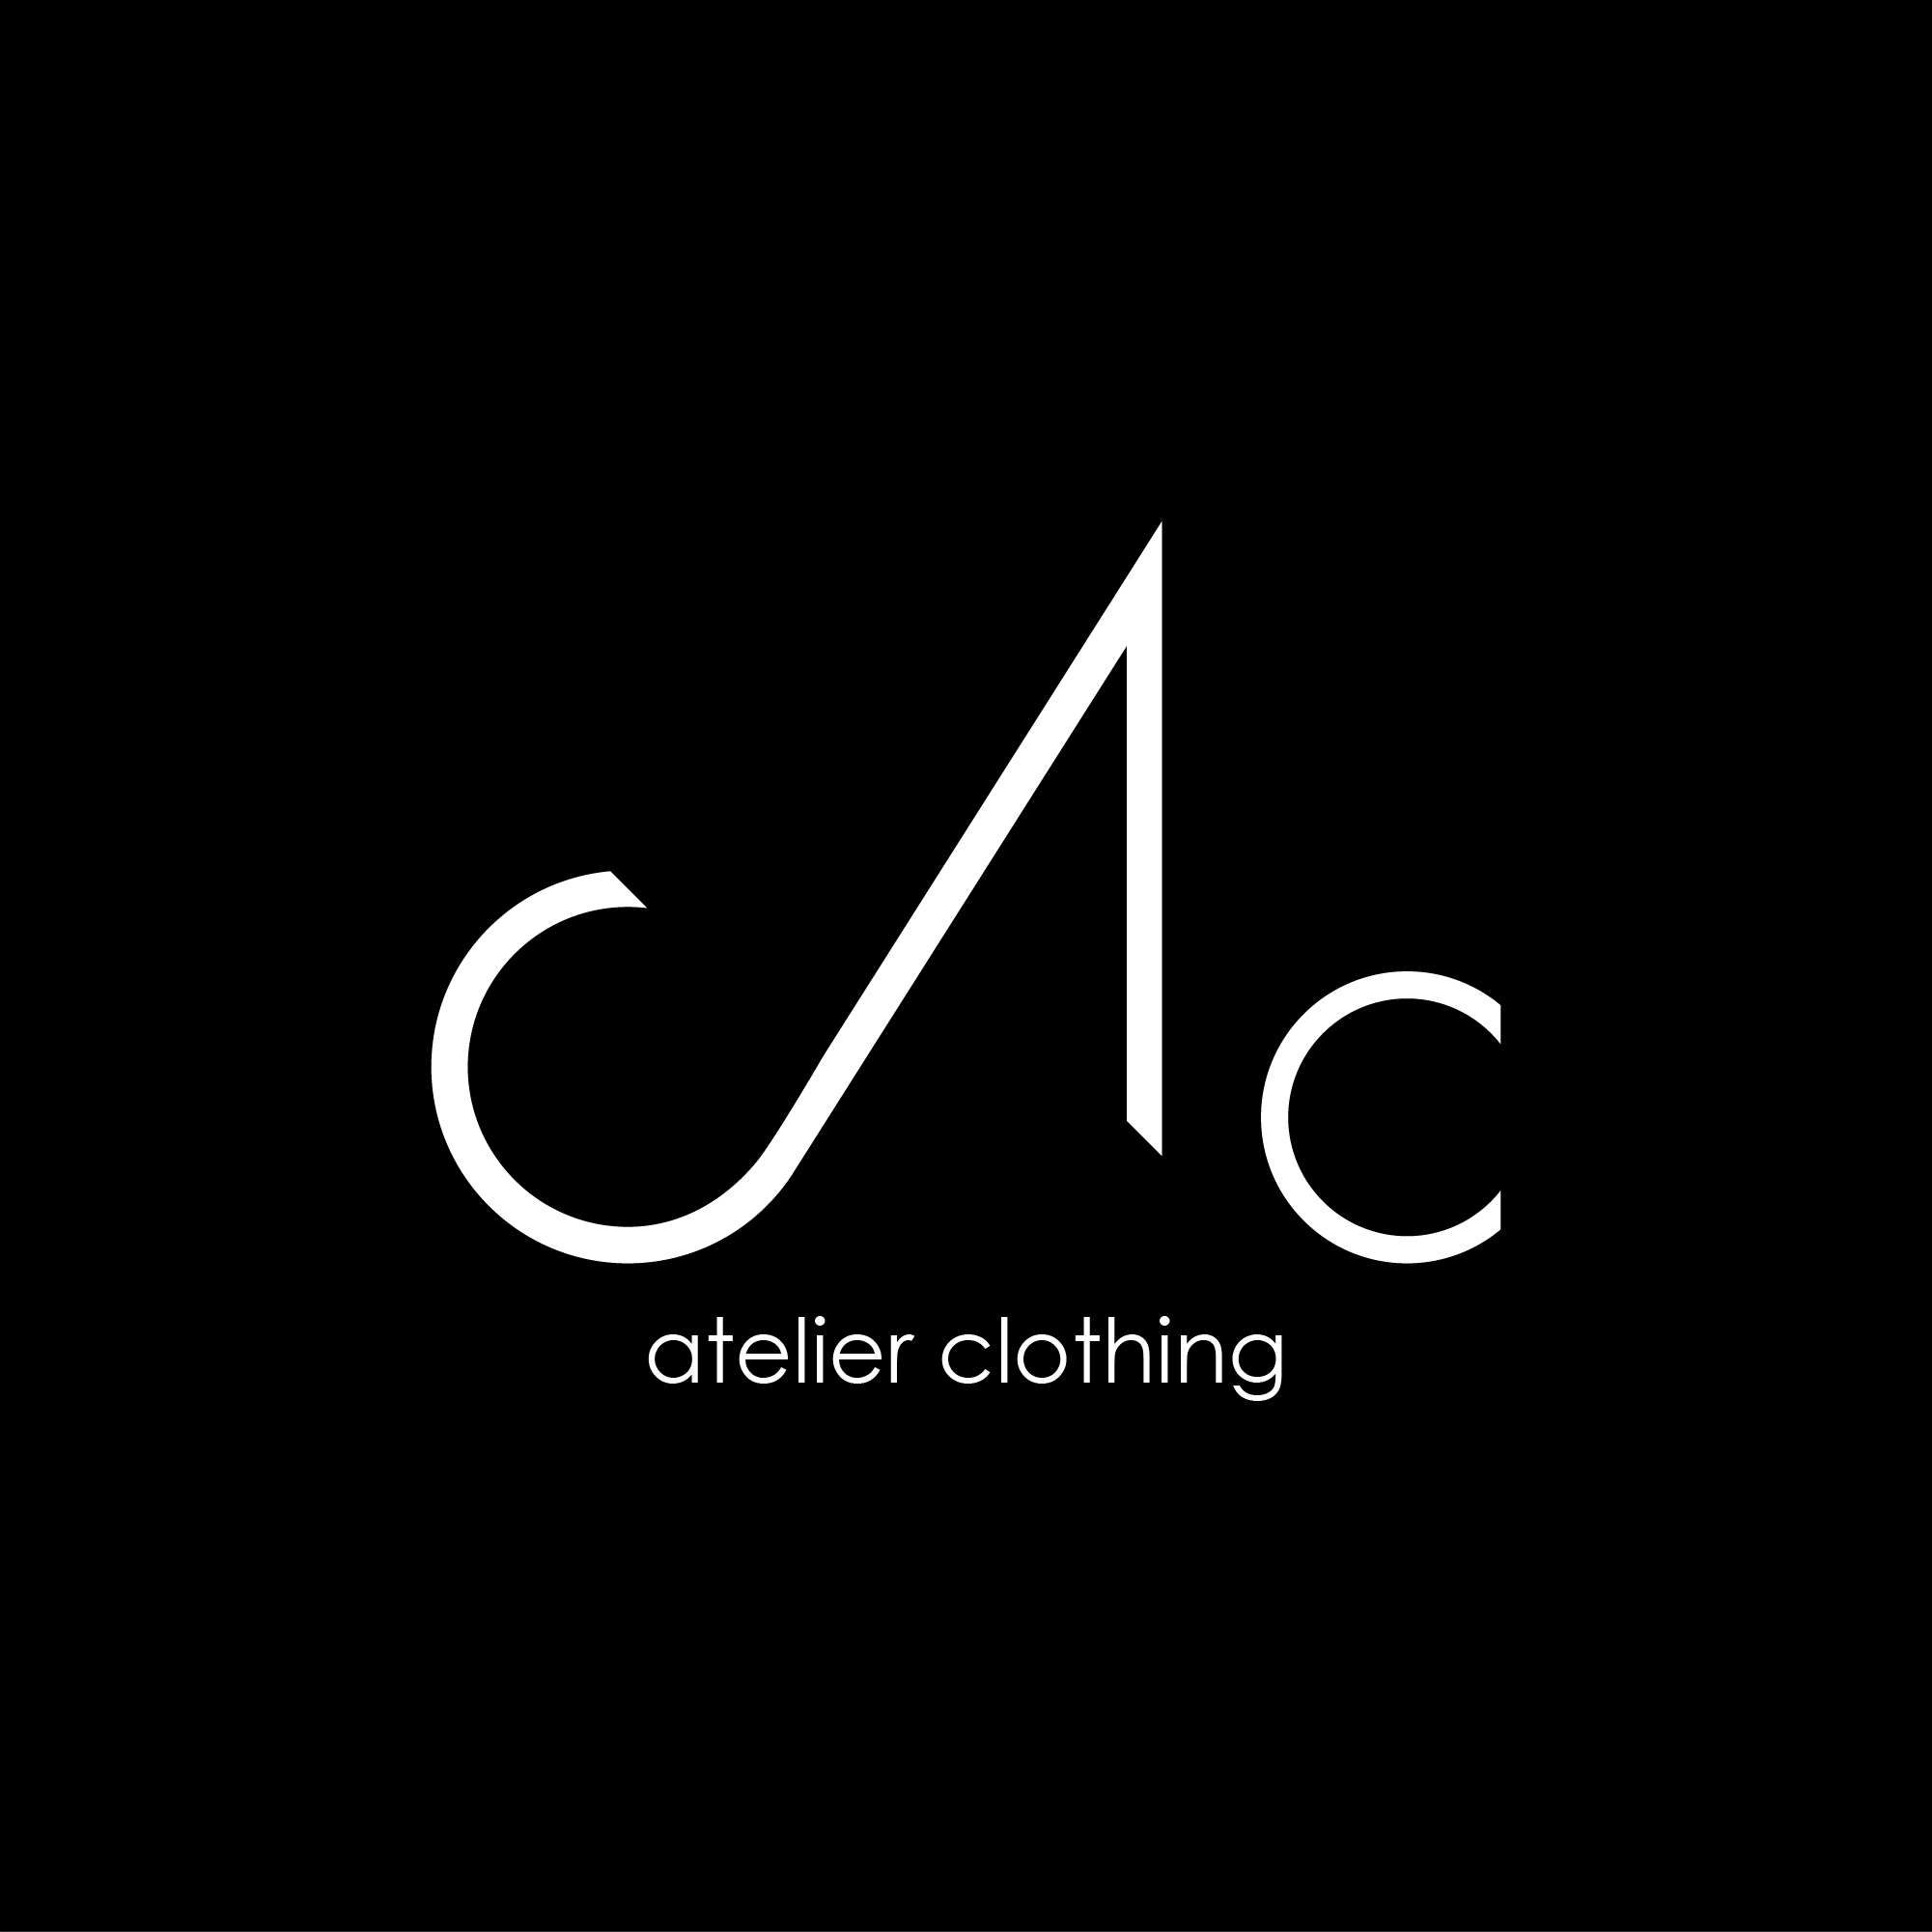 Logo for a clothing atelier preview image.